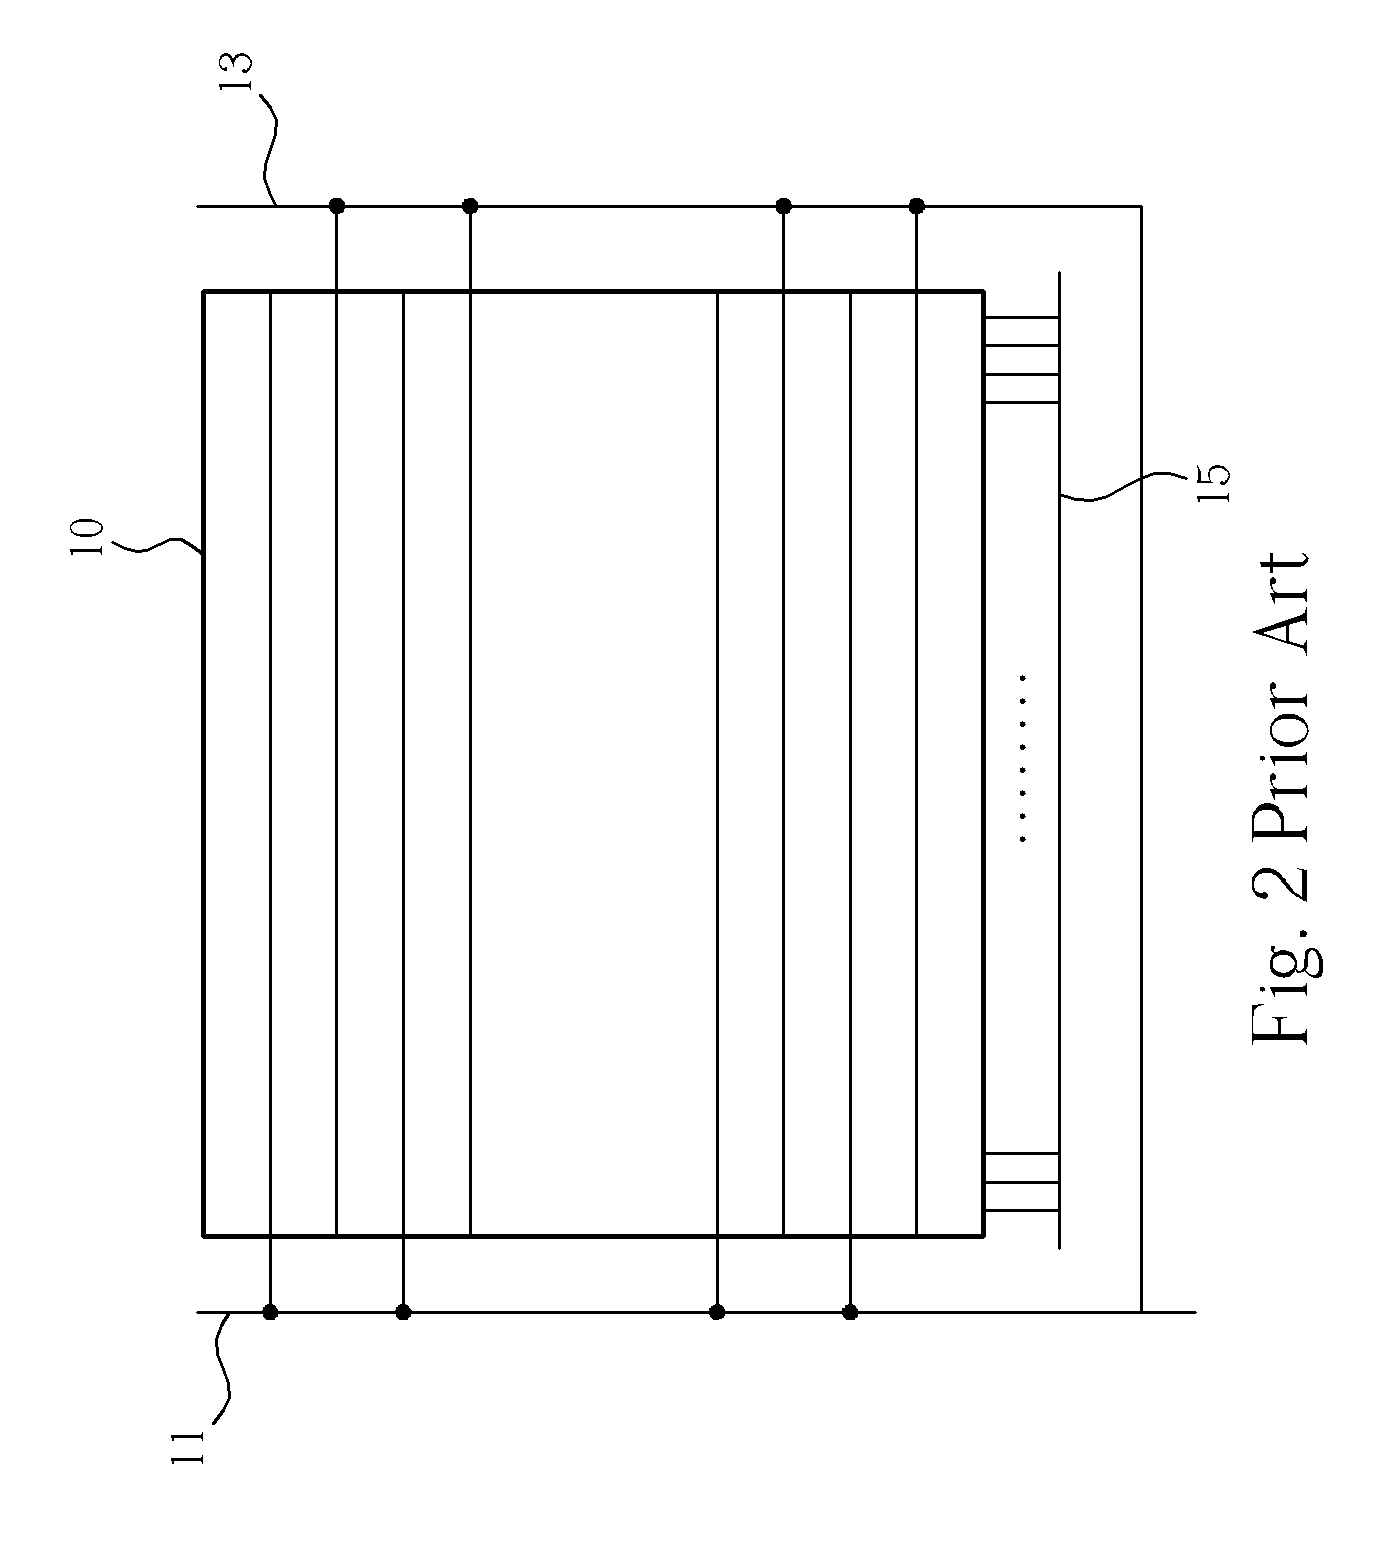 Display control system of a display panel and control method thereof